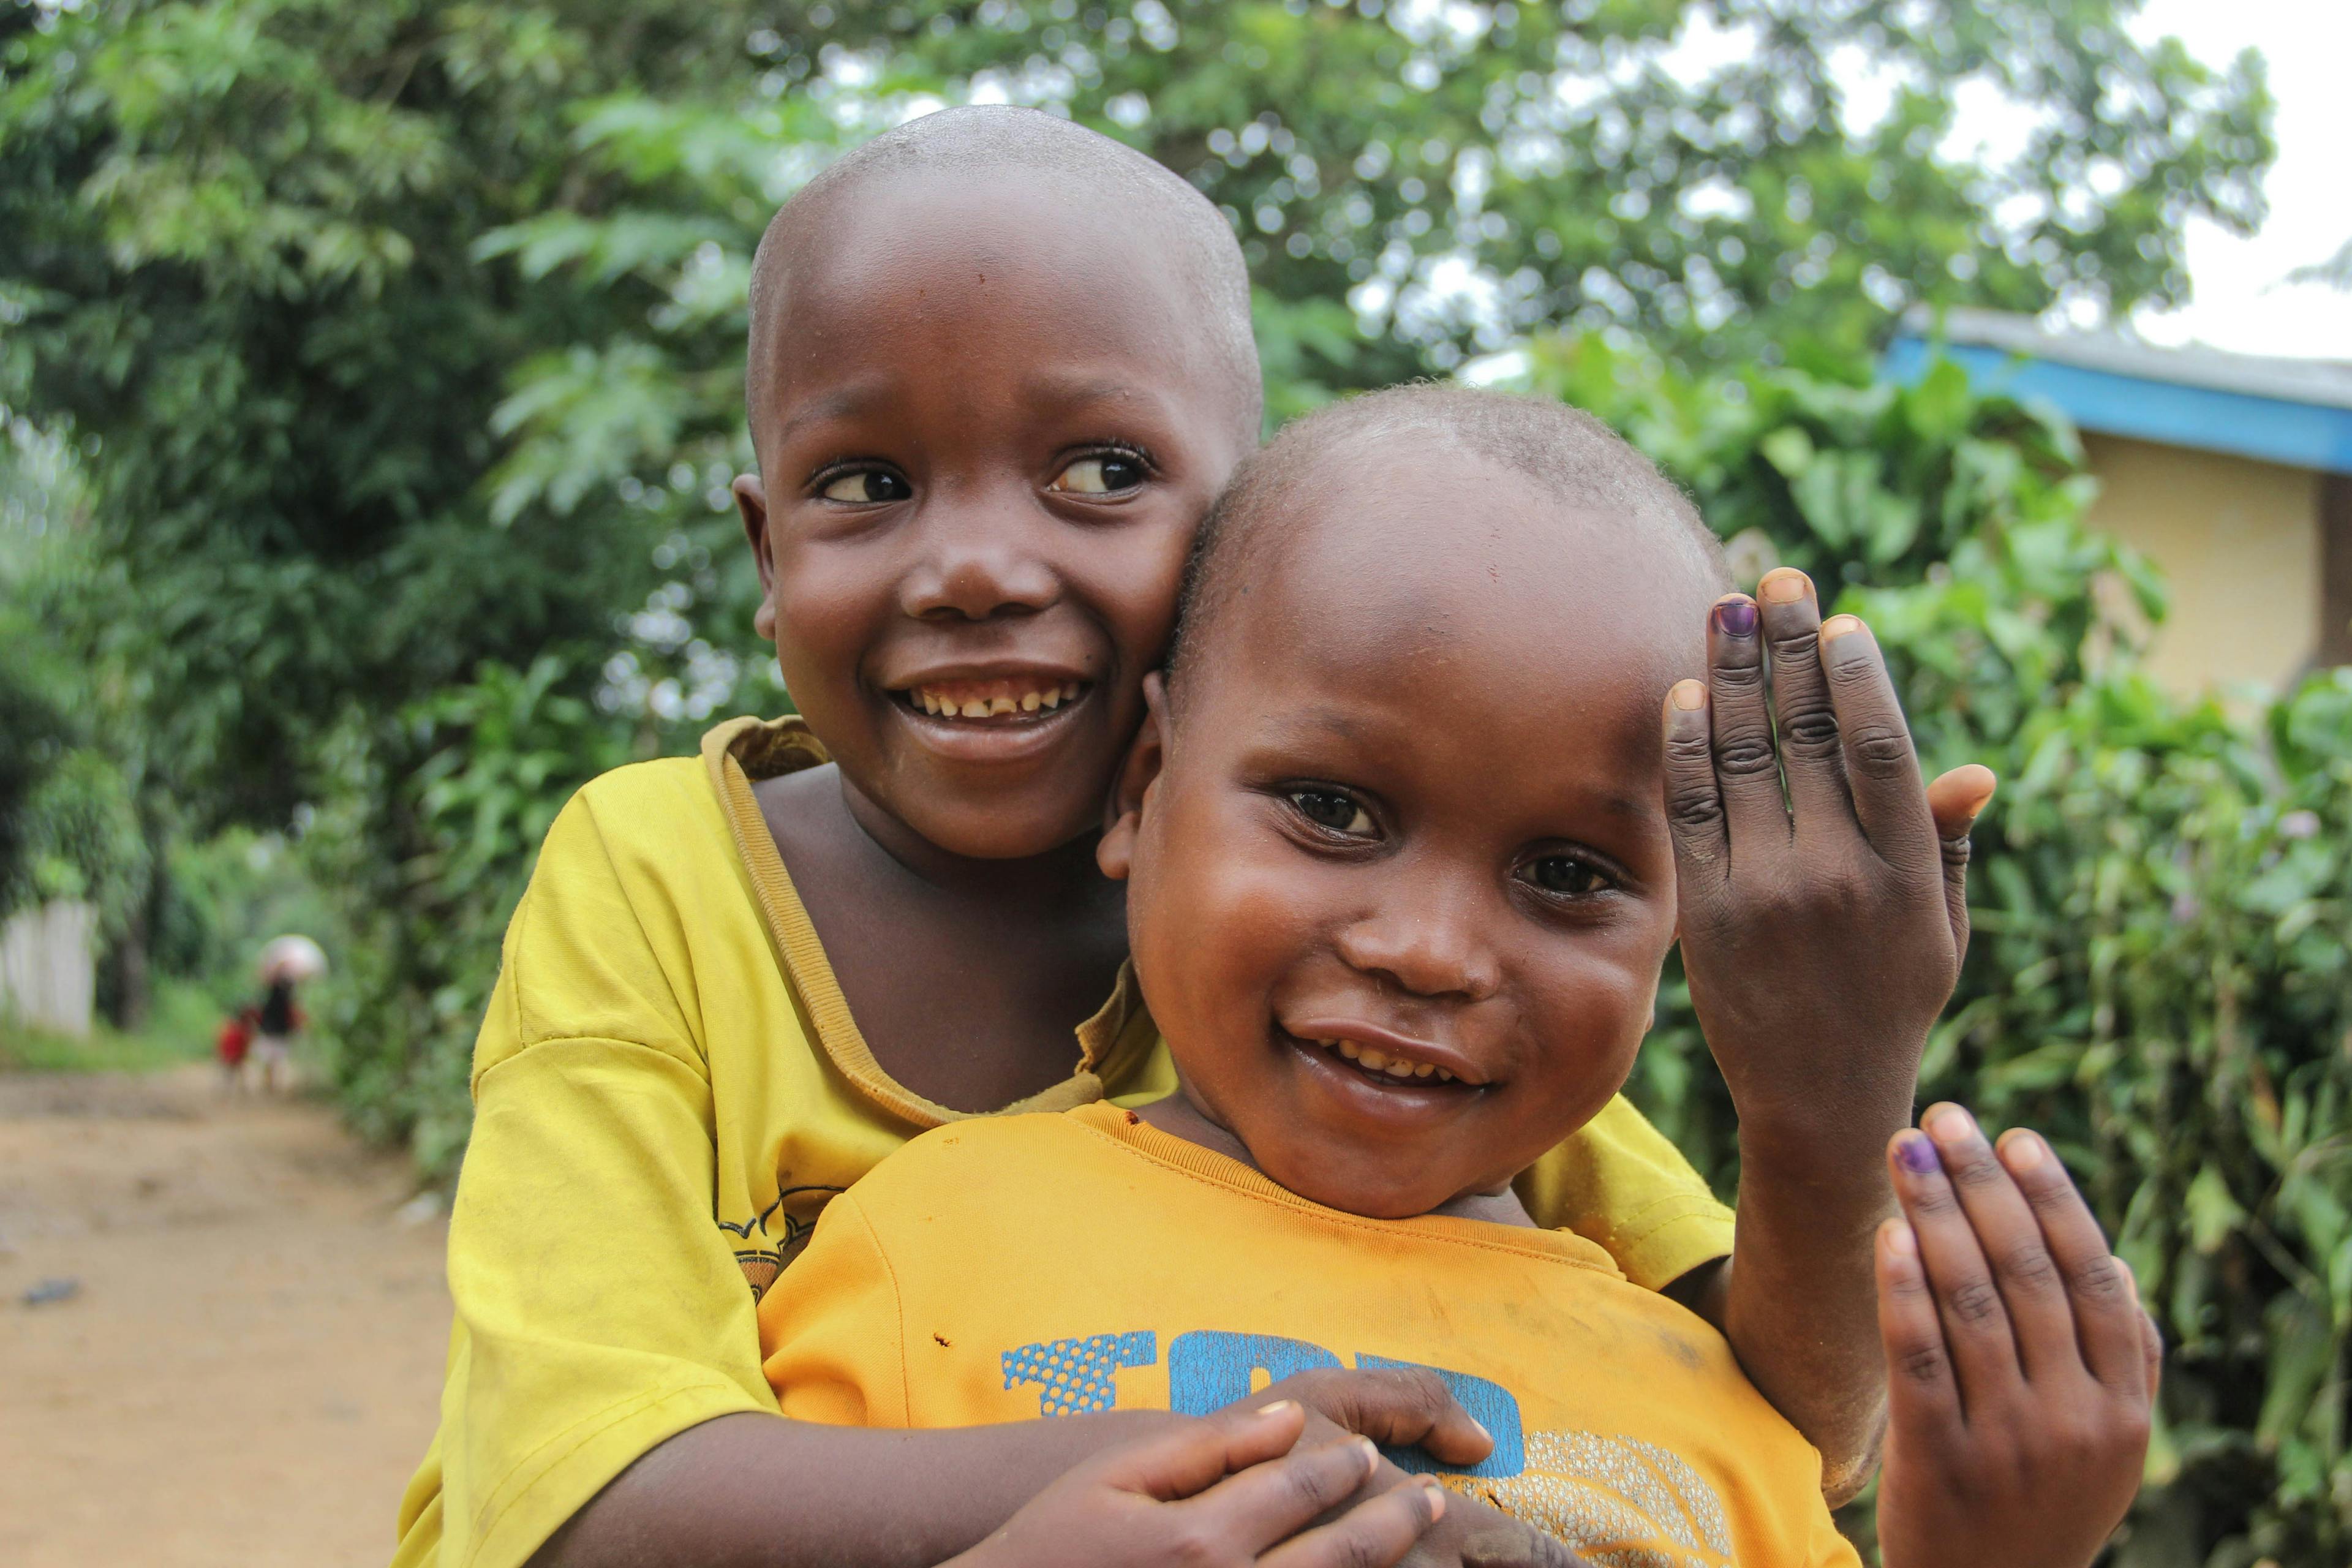 Immunisation - Michael and David show off their purple marked fingers that show they've received their polio vaccination